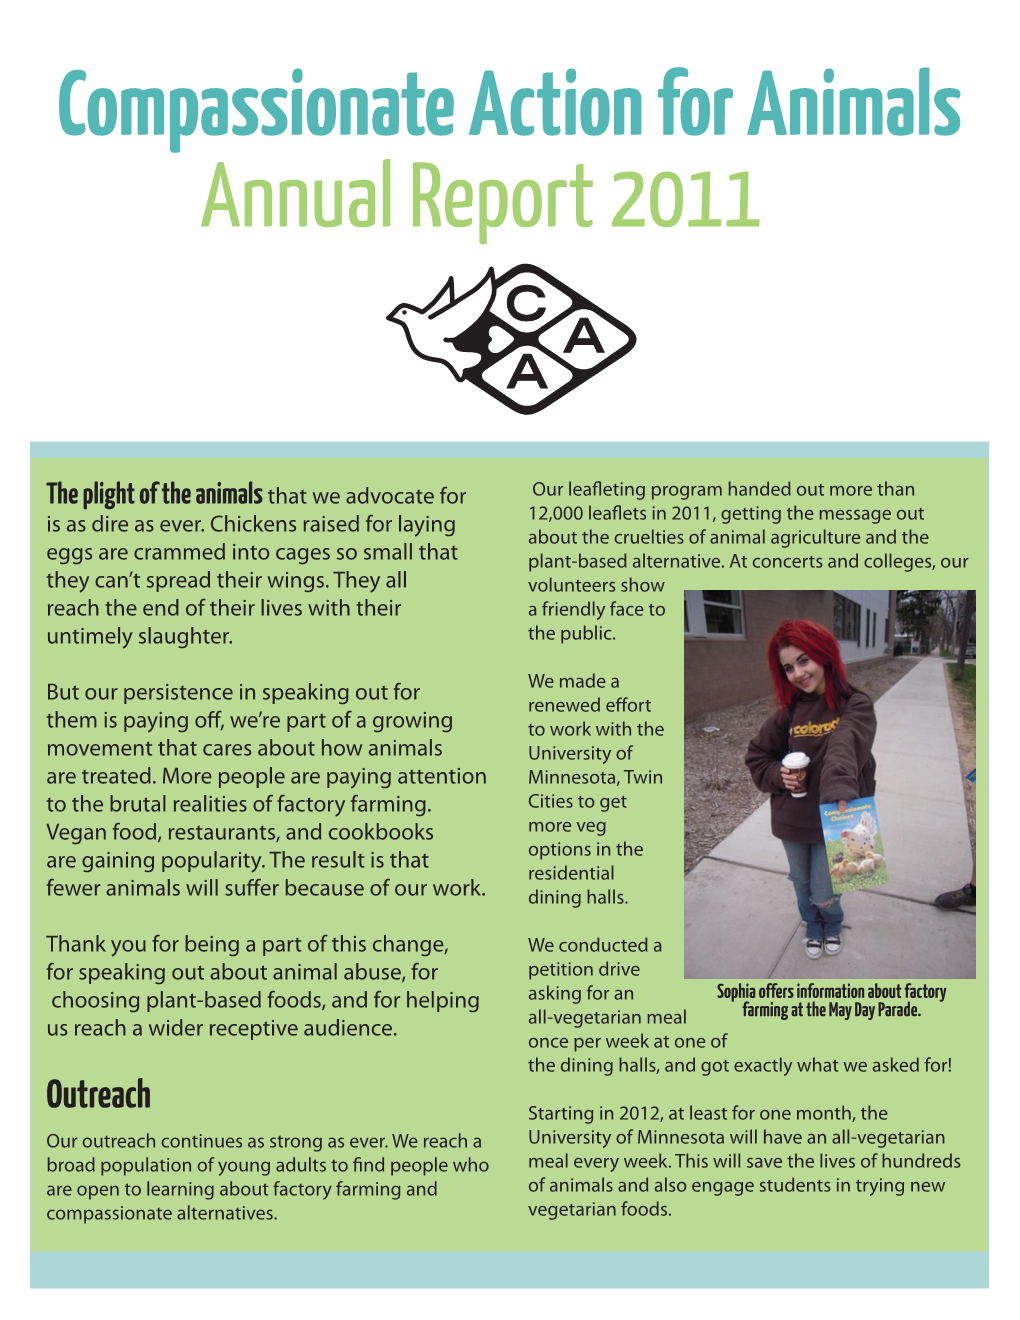 Compassionate Action for Animals Annual Report 2011